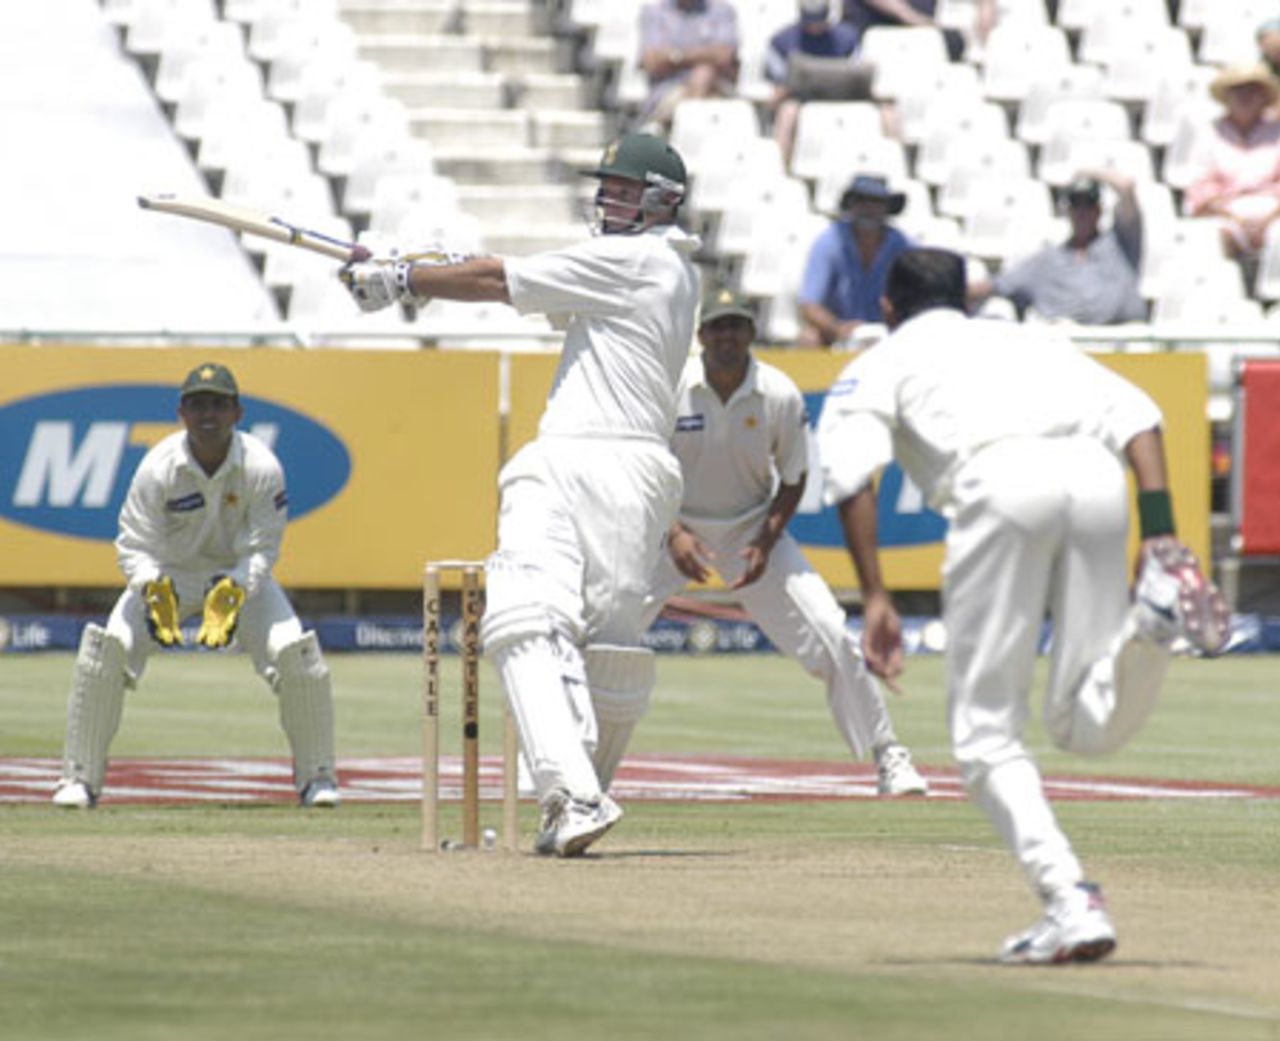 Graeme Smith pulls Mohammad Zahid for four at Newlands